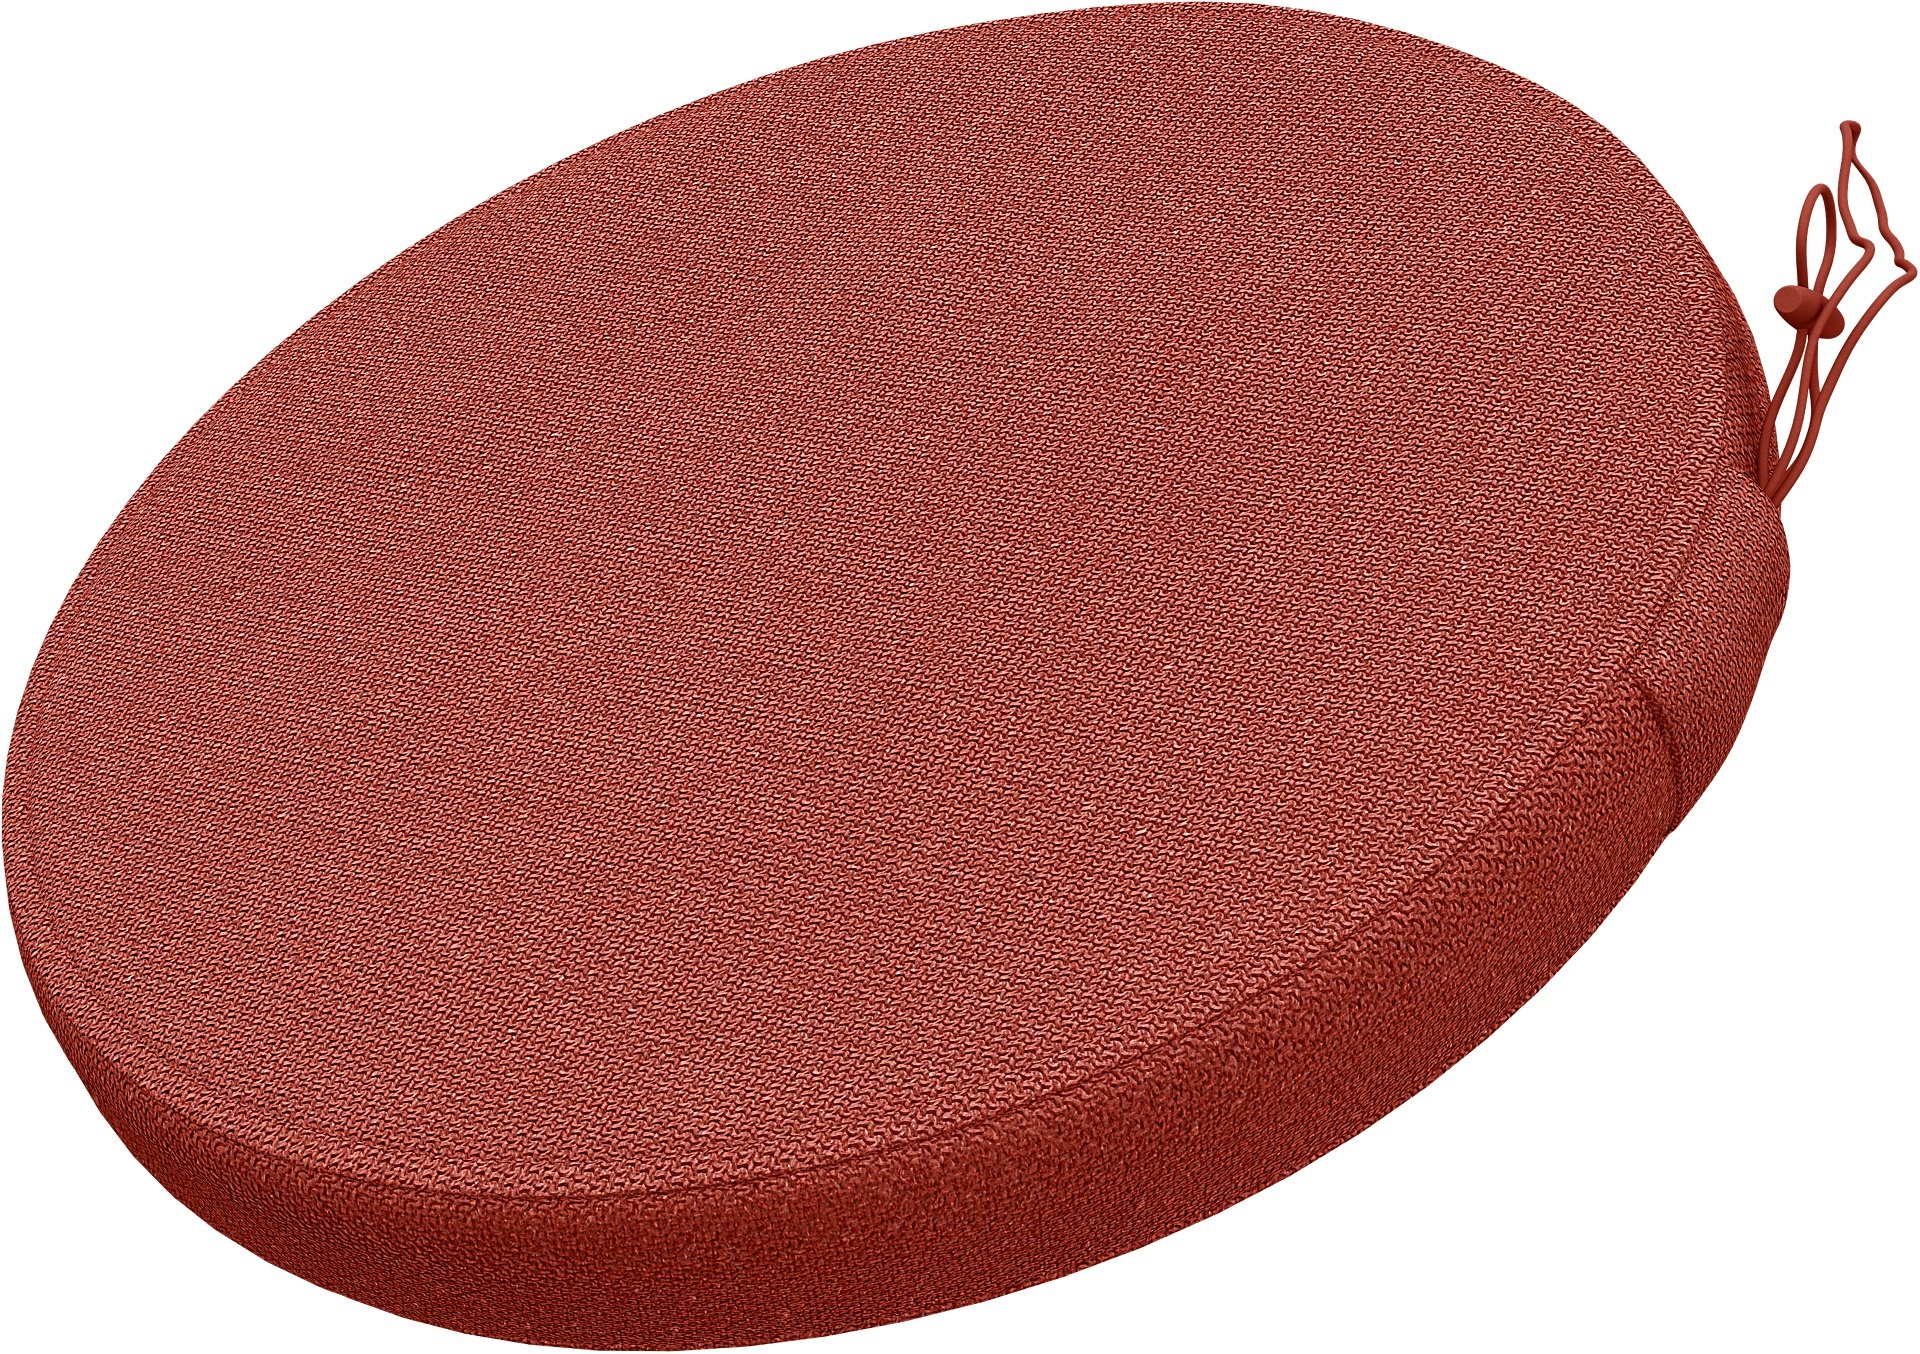 IKEA - Froson/Duvholmen Chair Seat Cushion Round Cover , Coral Red, Outdoor - Bemz